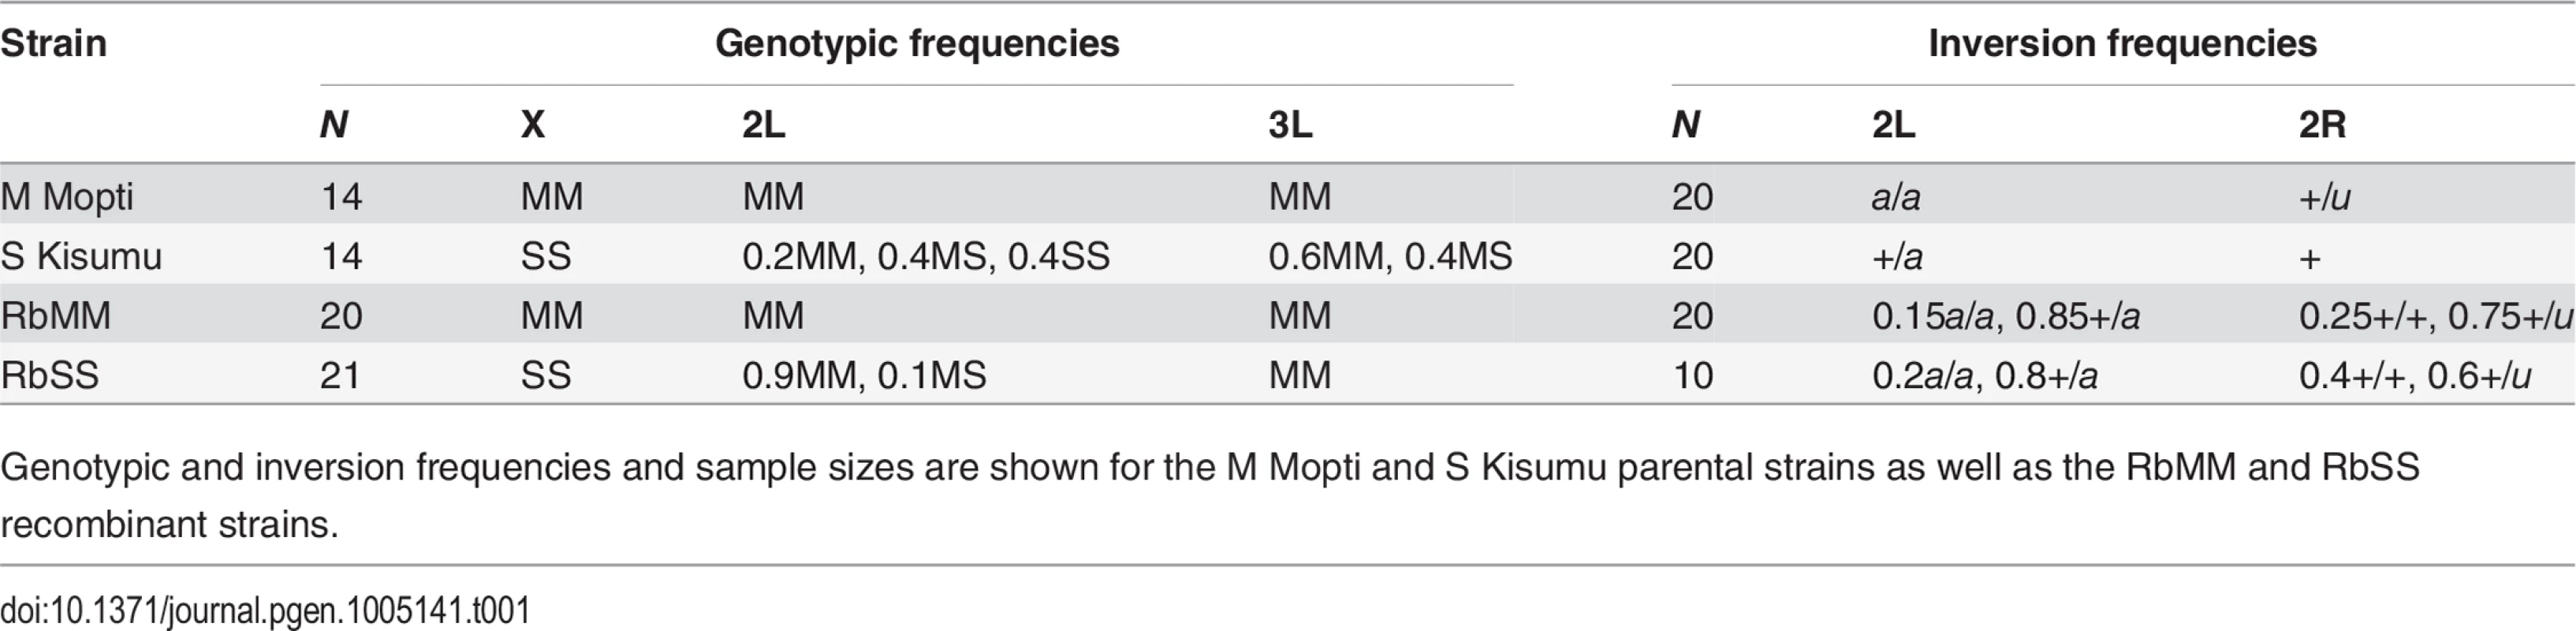 Recombinant and parental strains genotypes at the X, 2L and 3L divergence islands, and 2L and 2R inversion karyotypes.